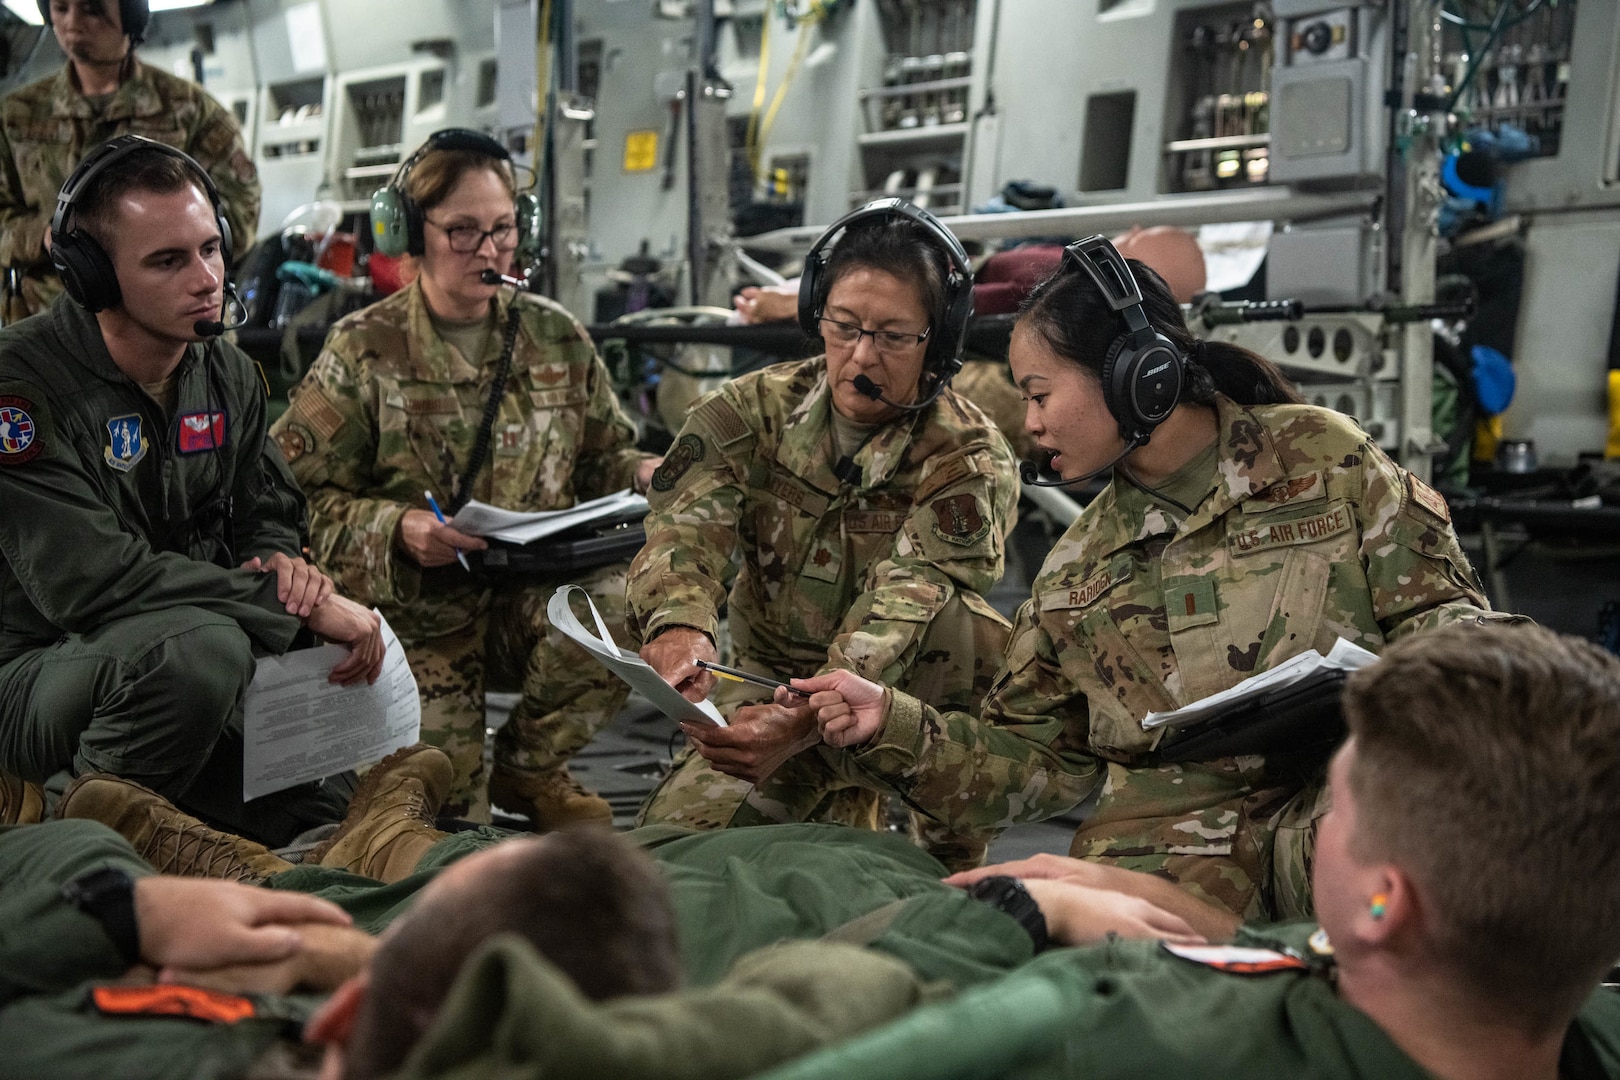 aeromedical evacuation medical airmen respond to a simulated medical event during a training flight